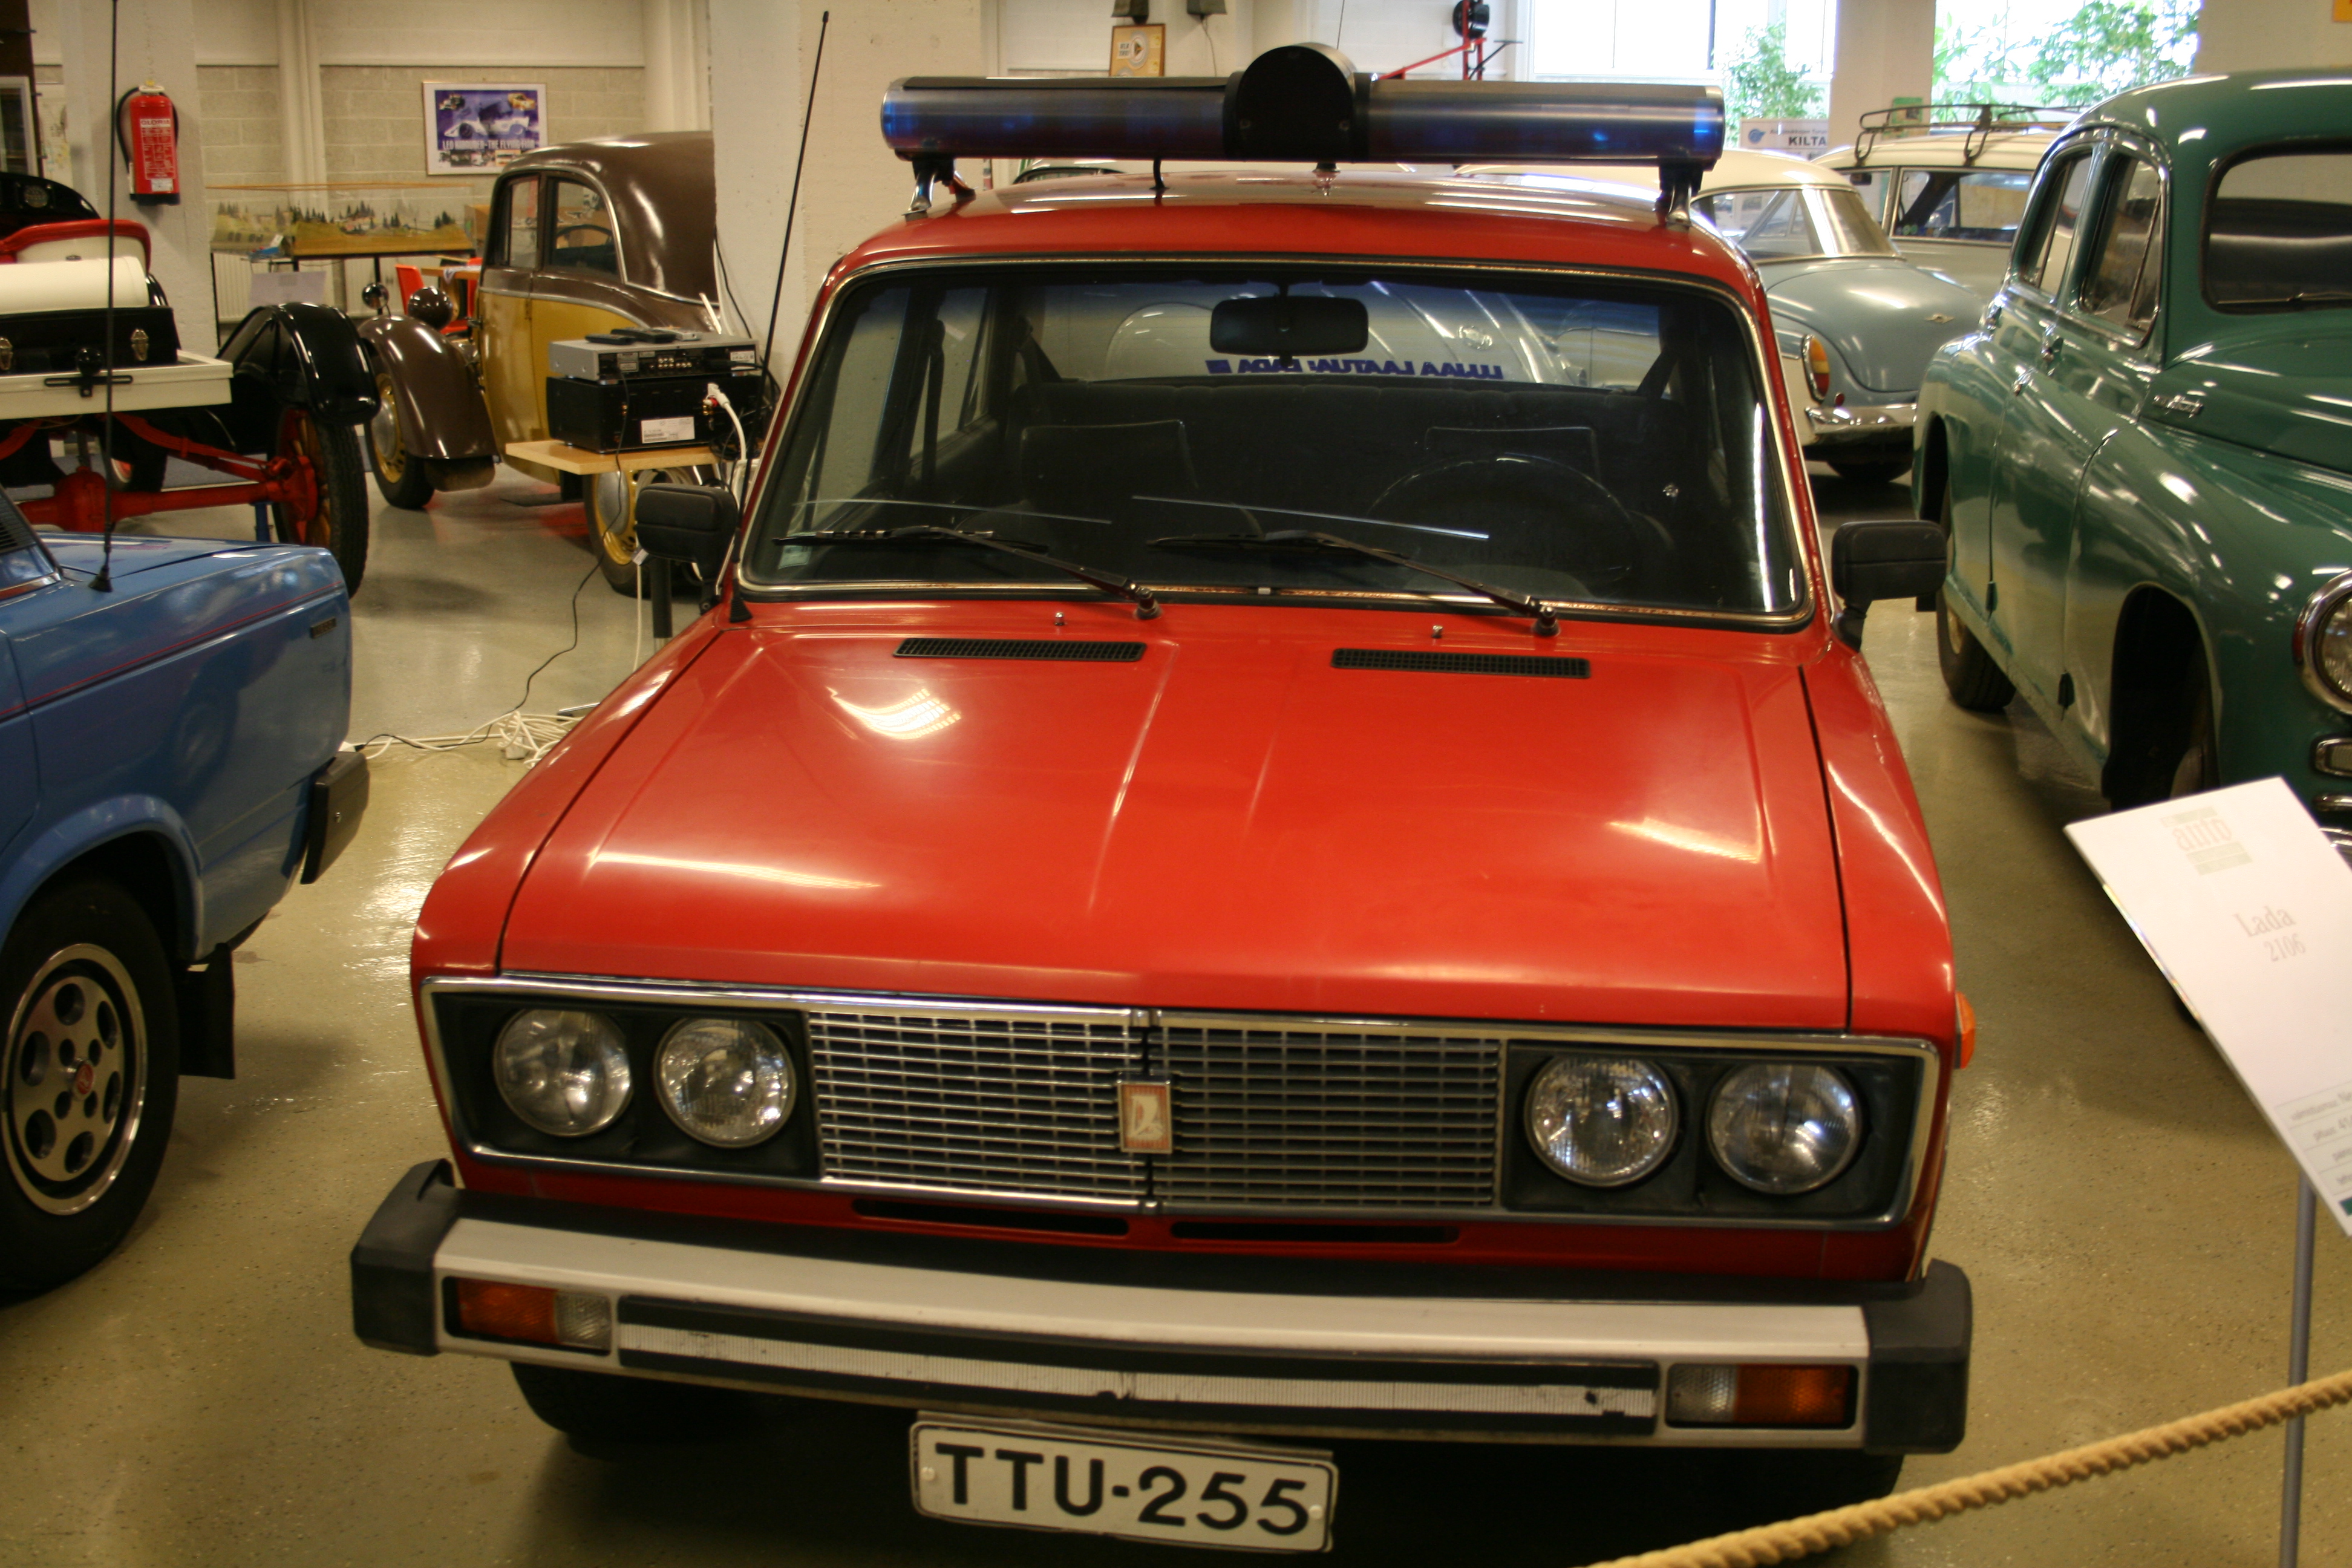 Red Lada 2106 emergency service vehicle at the Car and Communication Museum in Finland